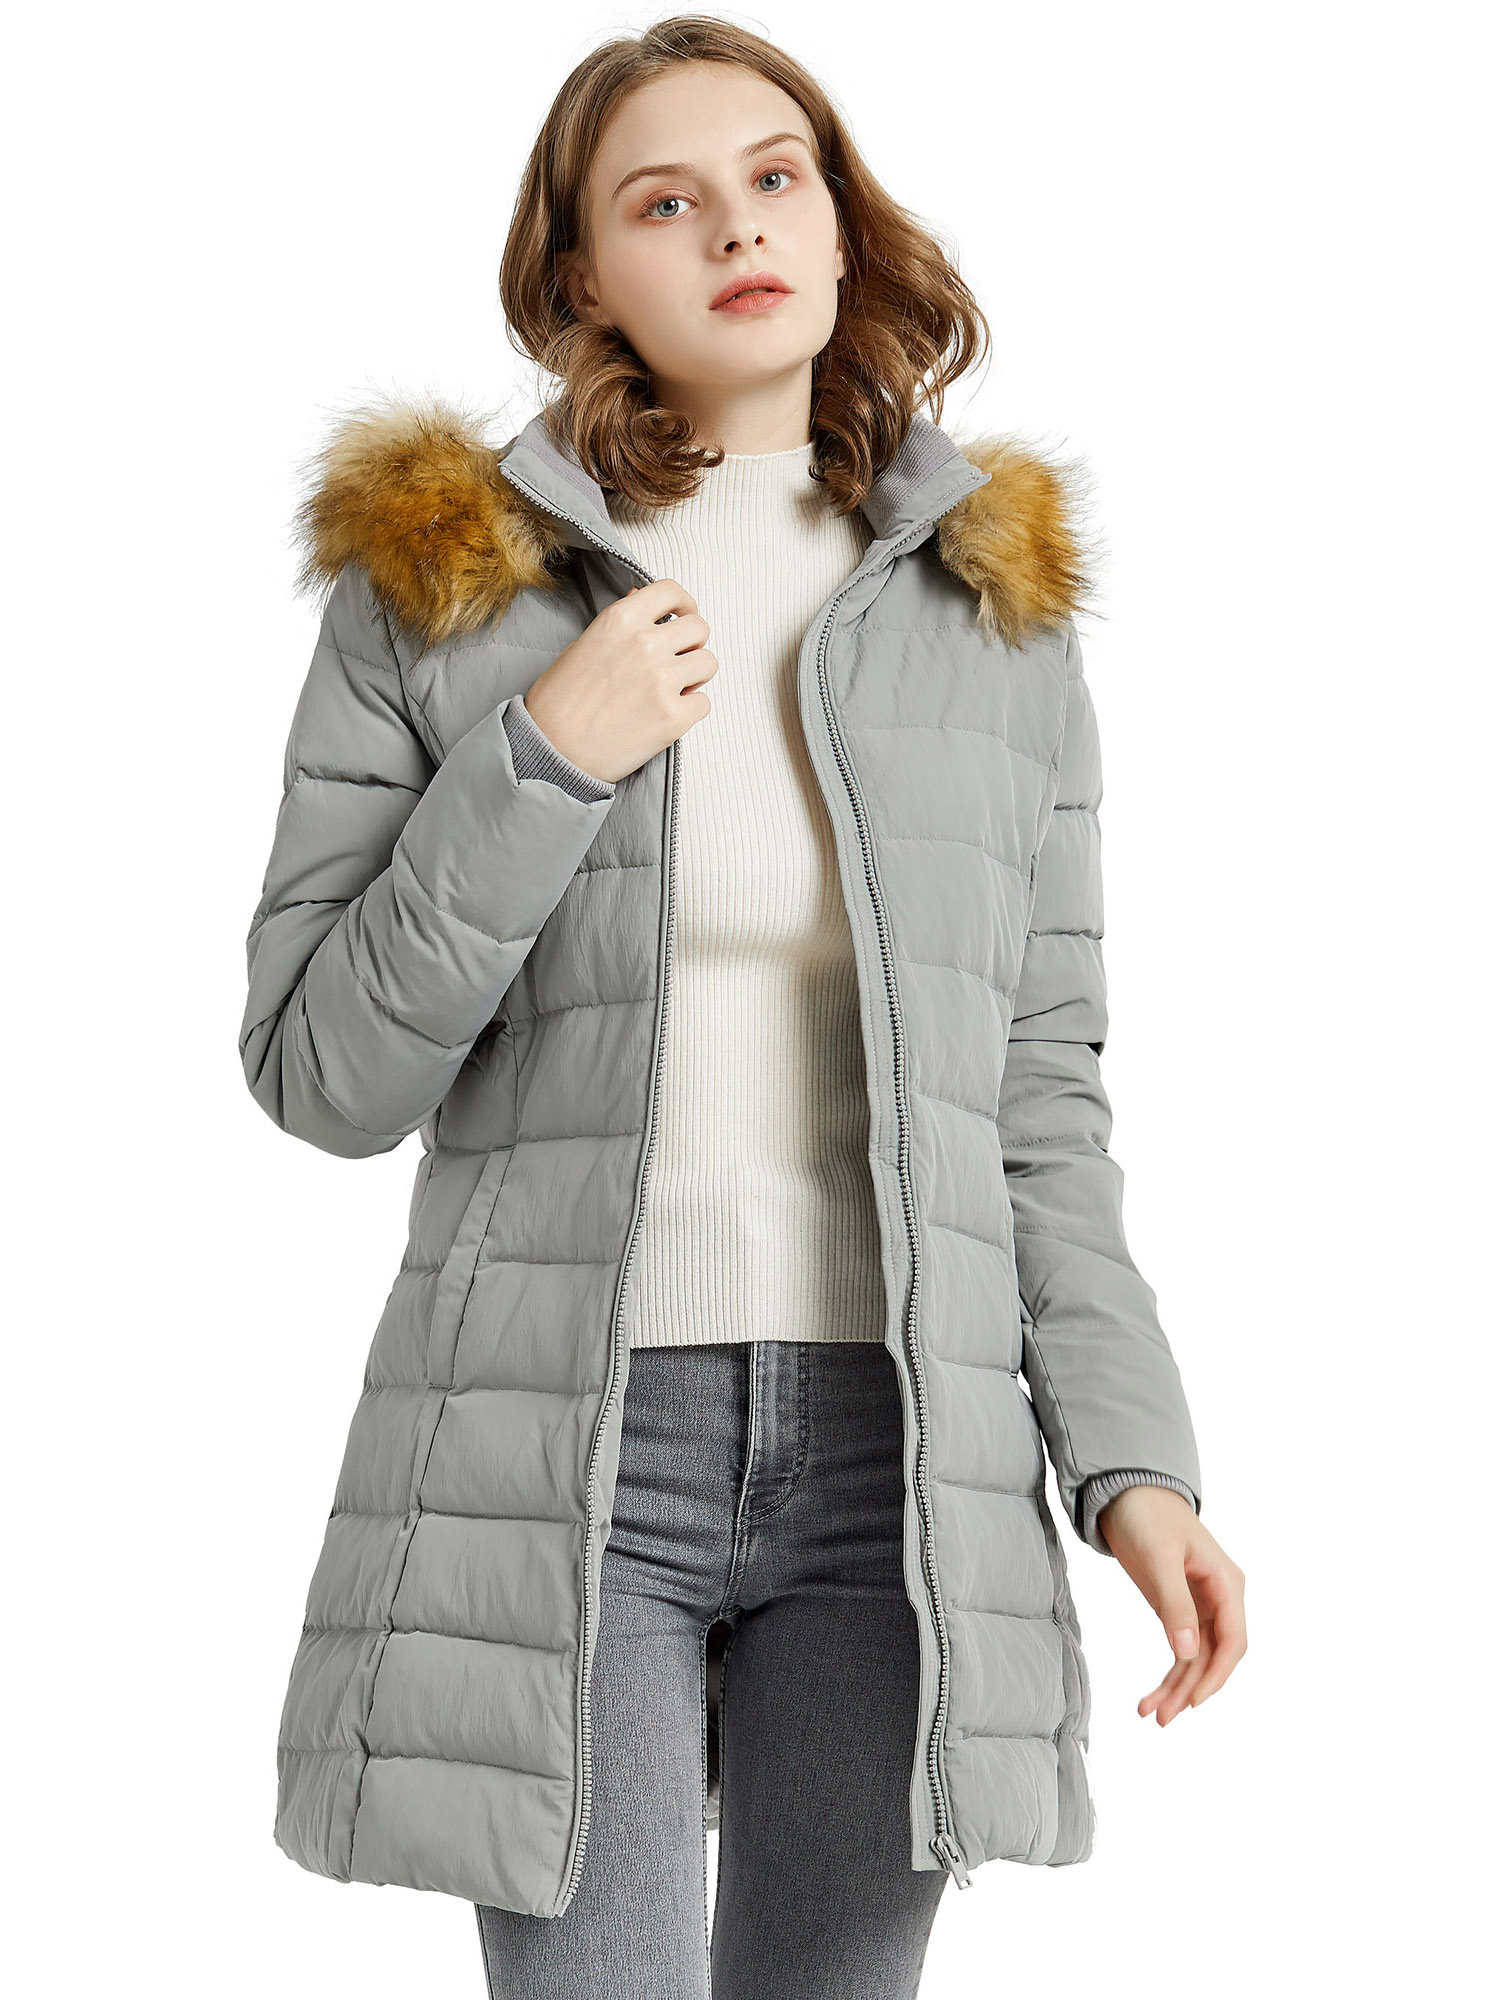 Orolay Women's Lightweight Quilted Down Jackets Water Resistant Slim Winter Coat Grey L - image 3 of 5